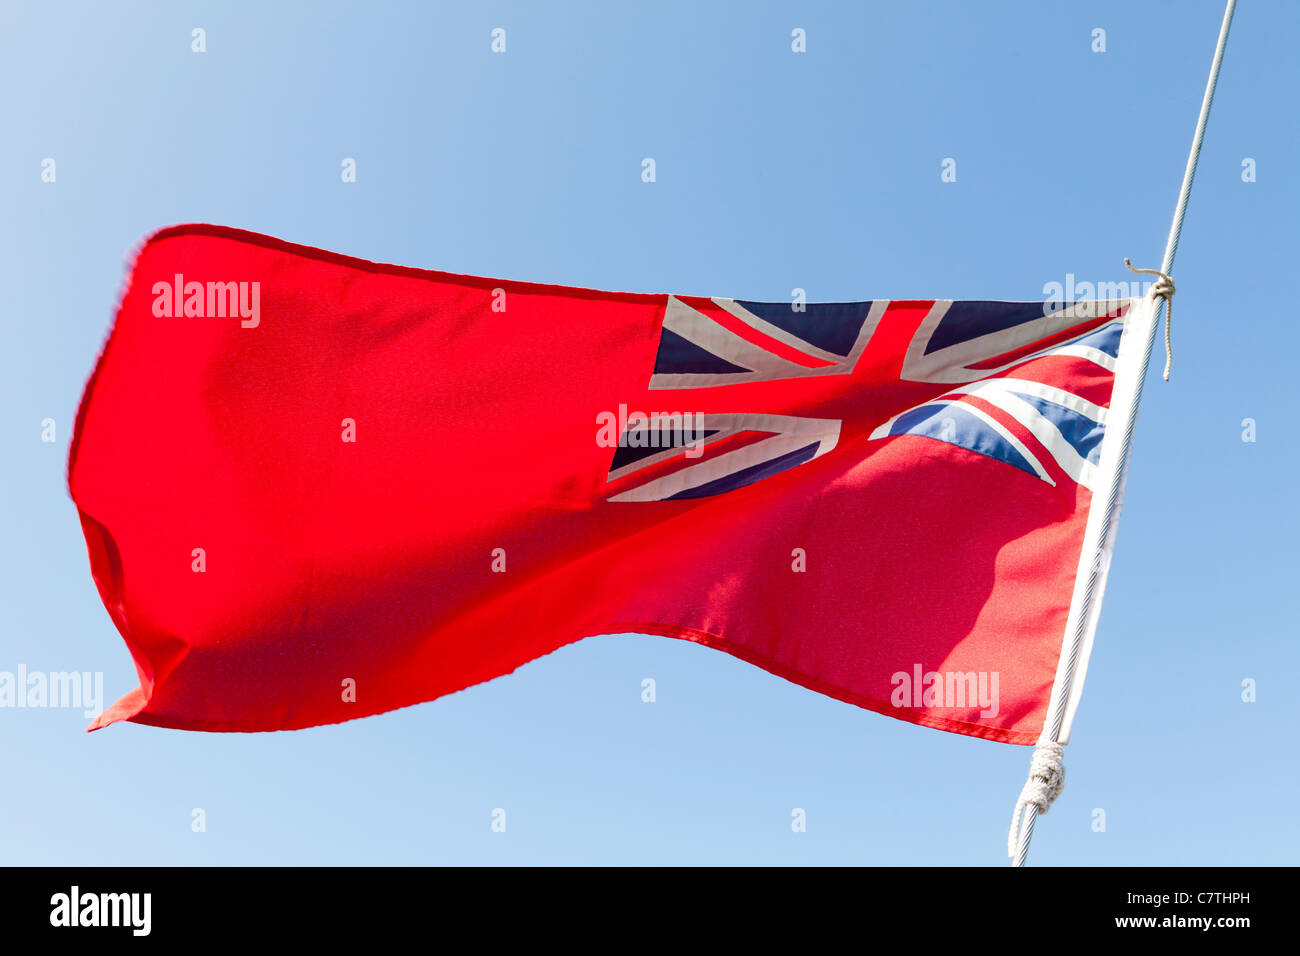 The red ensign, known as the red duster, flying in the breeze against a blue sky Stock Photo